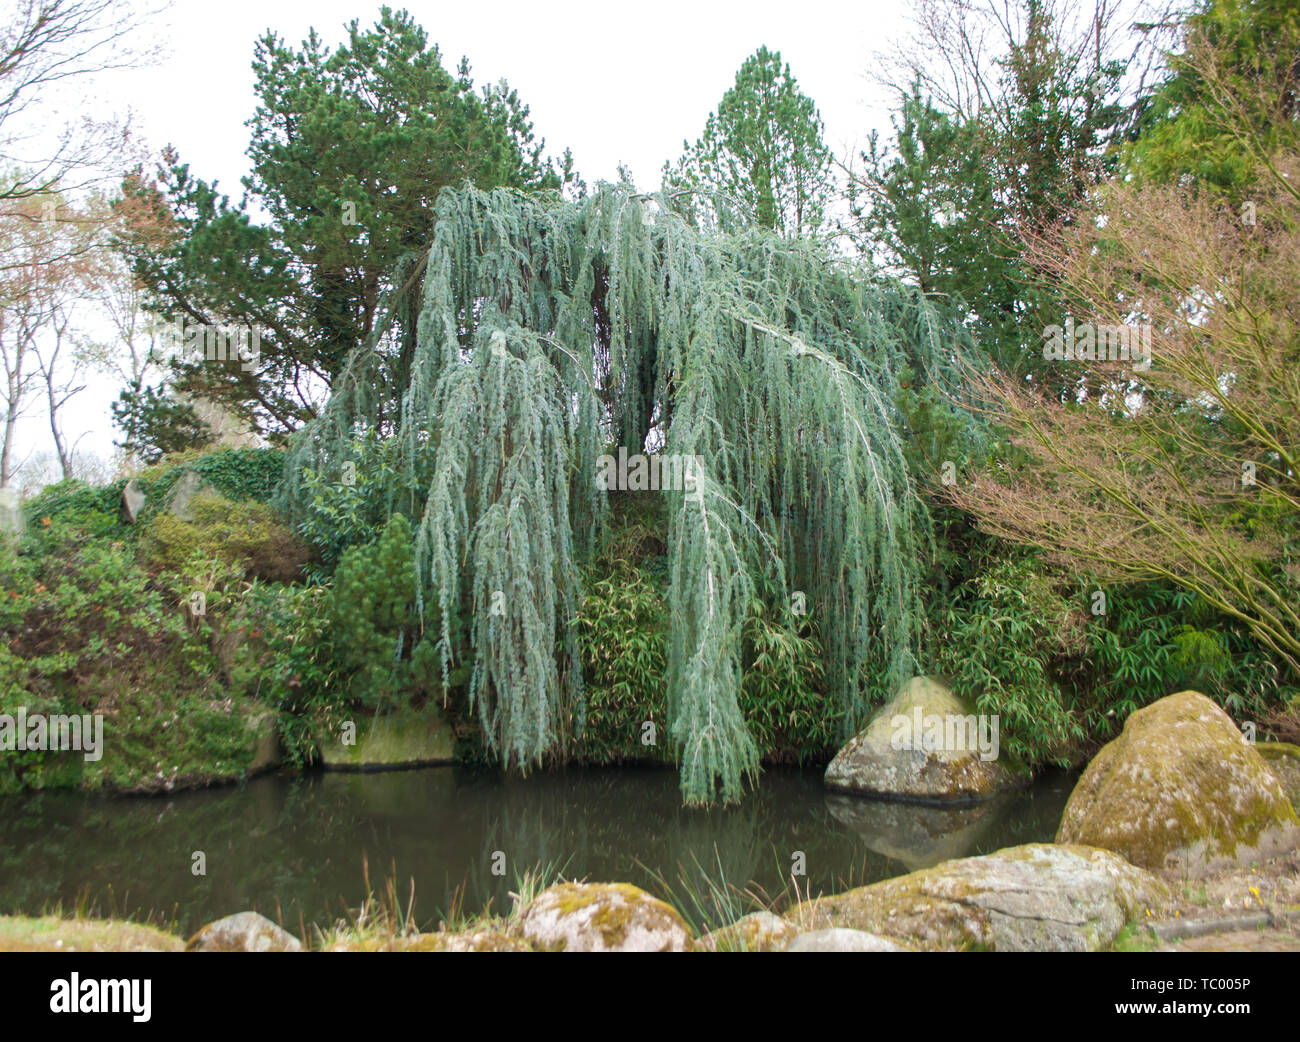 Weeping Atlas Cedar, Cedrus Atlantica, 'Glauca Pendula', Blue Atlas Cedar , lowered the branches to the water, near a small pond, surrounded by other  Stock Photo